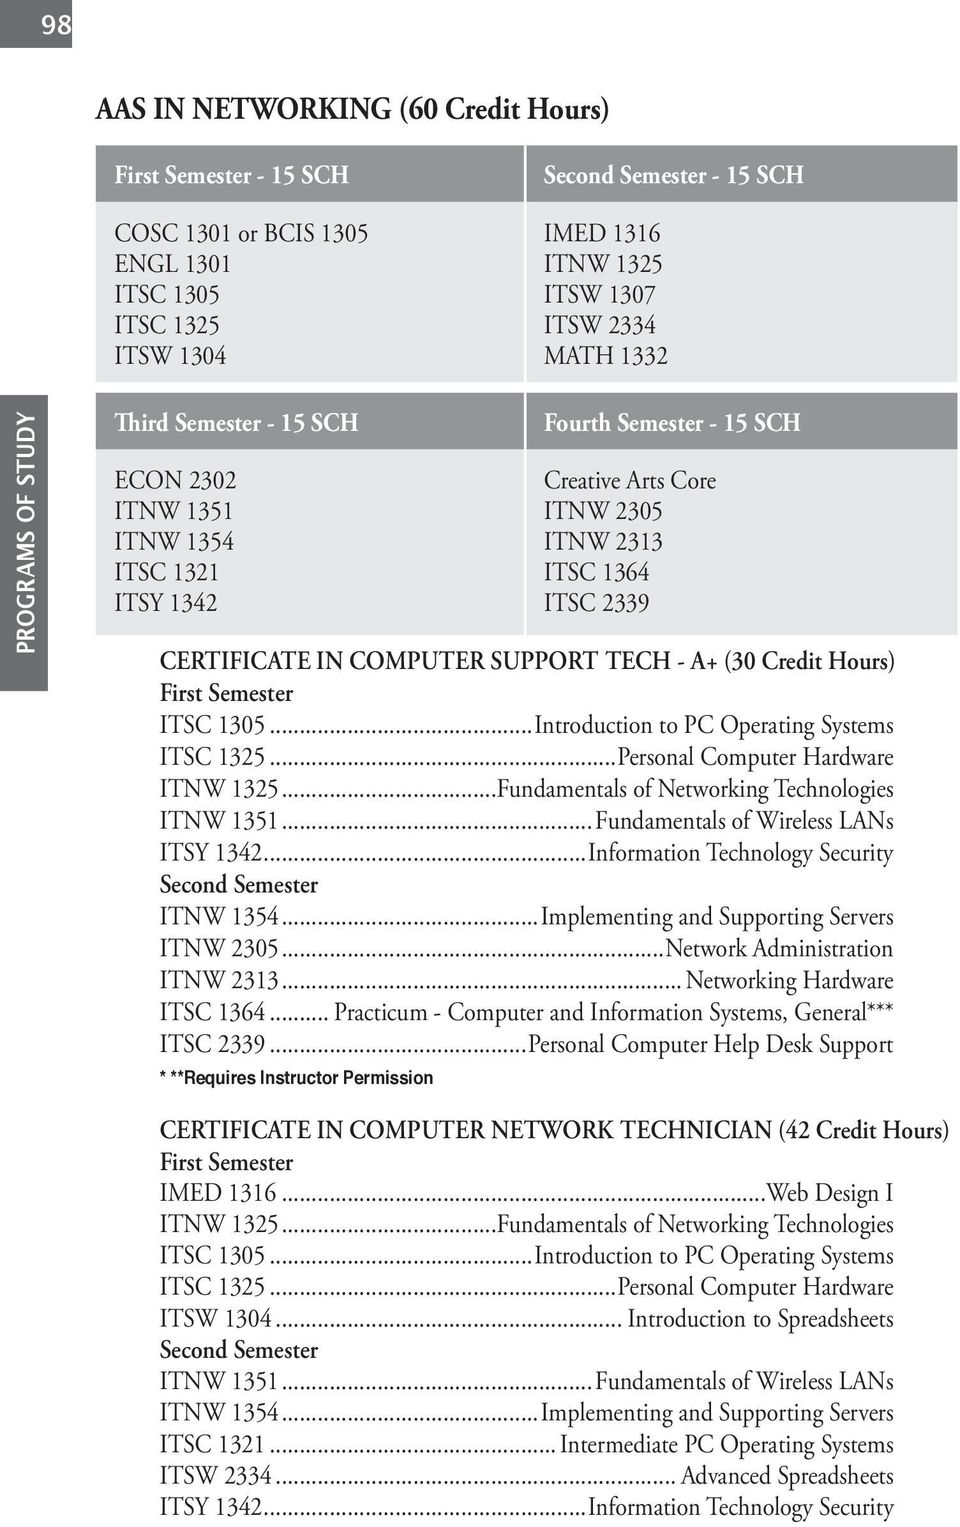 ..Introduction to PC Operating Systems ITSC 1325...Personal Computer Hardware ITNW 1325...Fundamentals of Networking Technologies ITNW 1351...Fundamentals of Wireless LANs ITSY 1342.